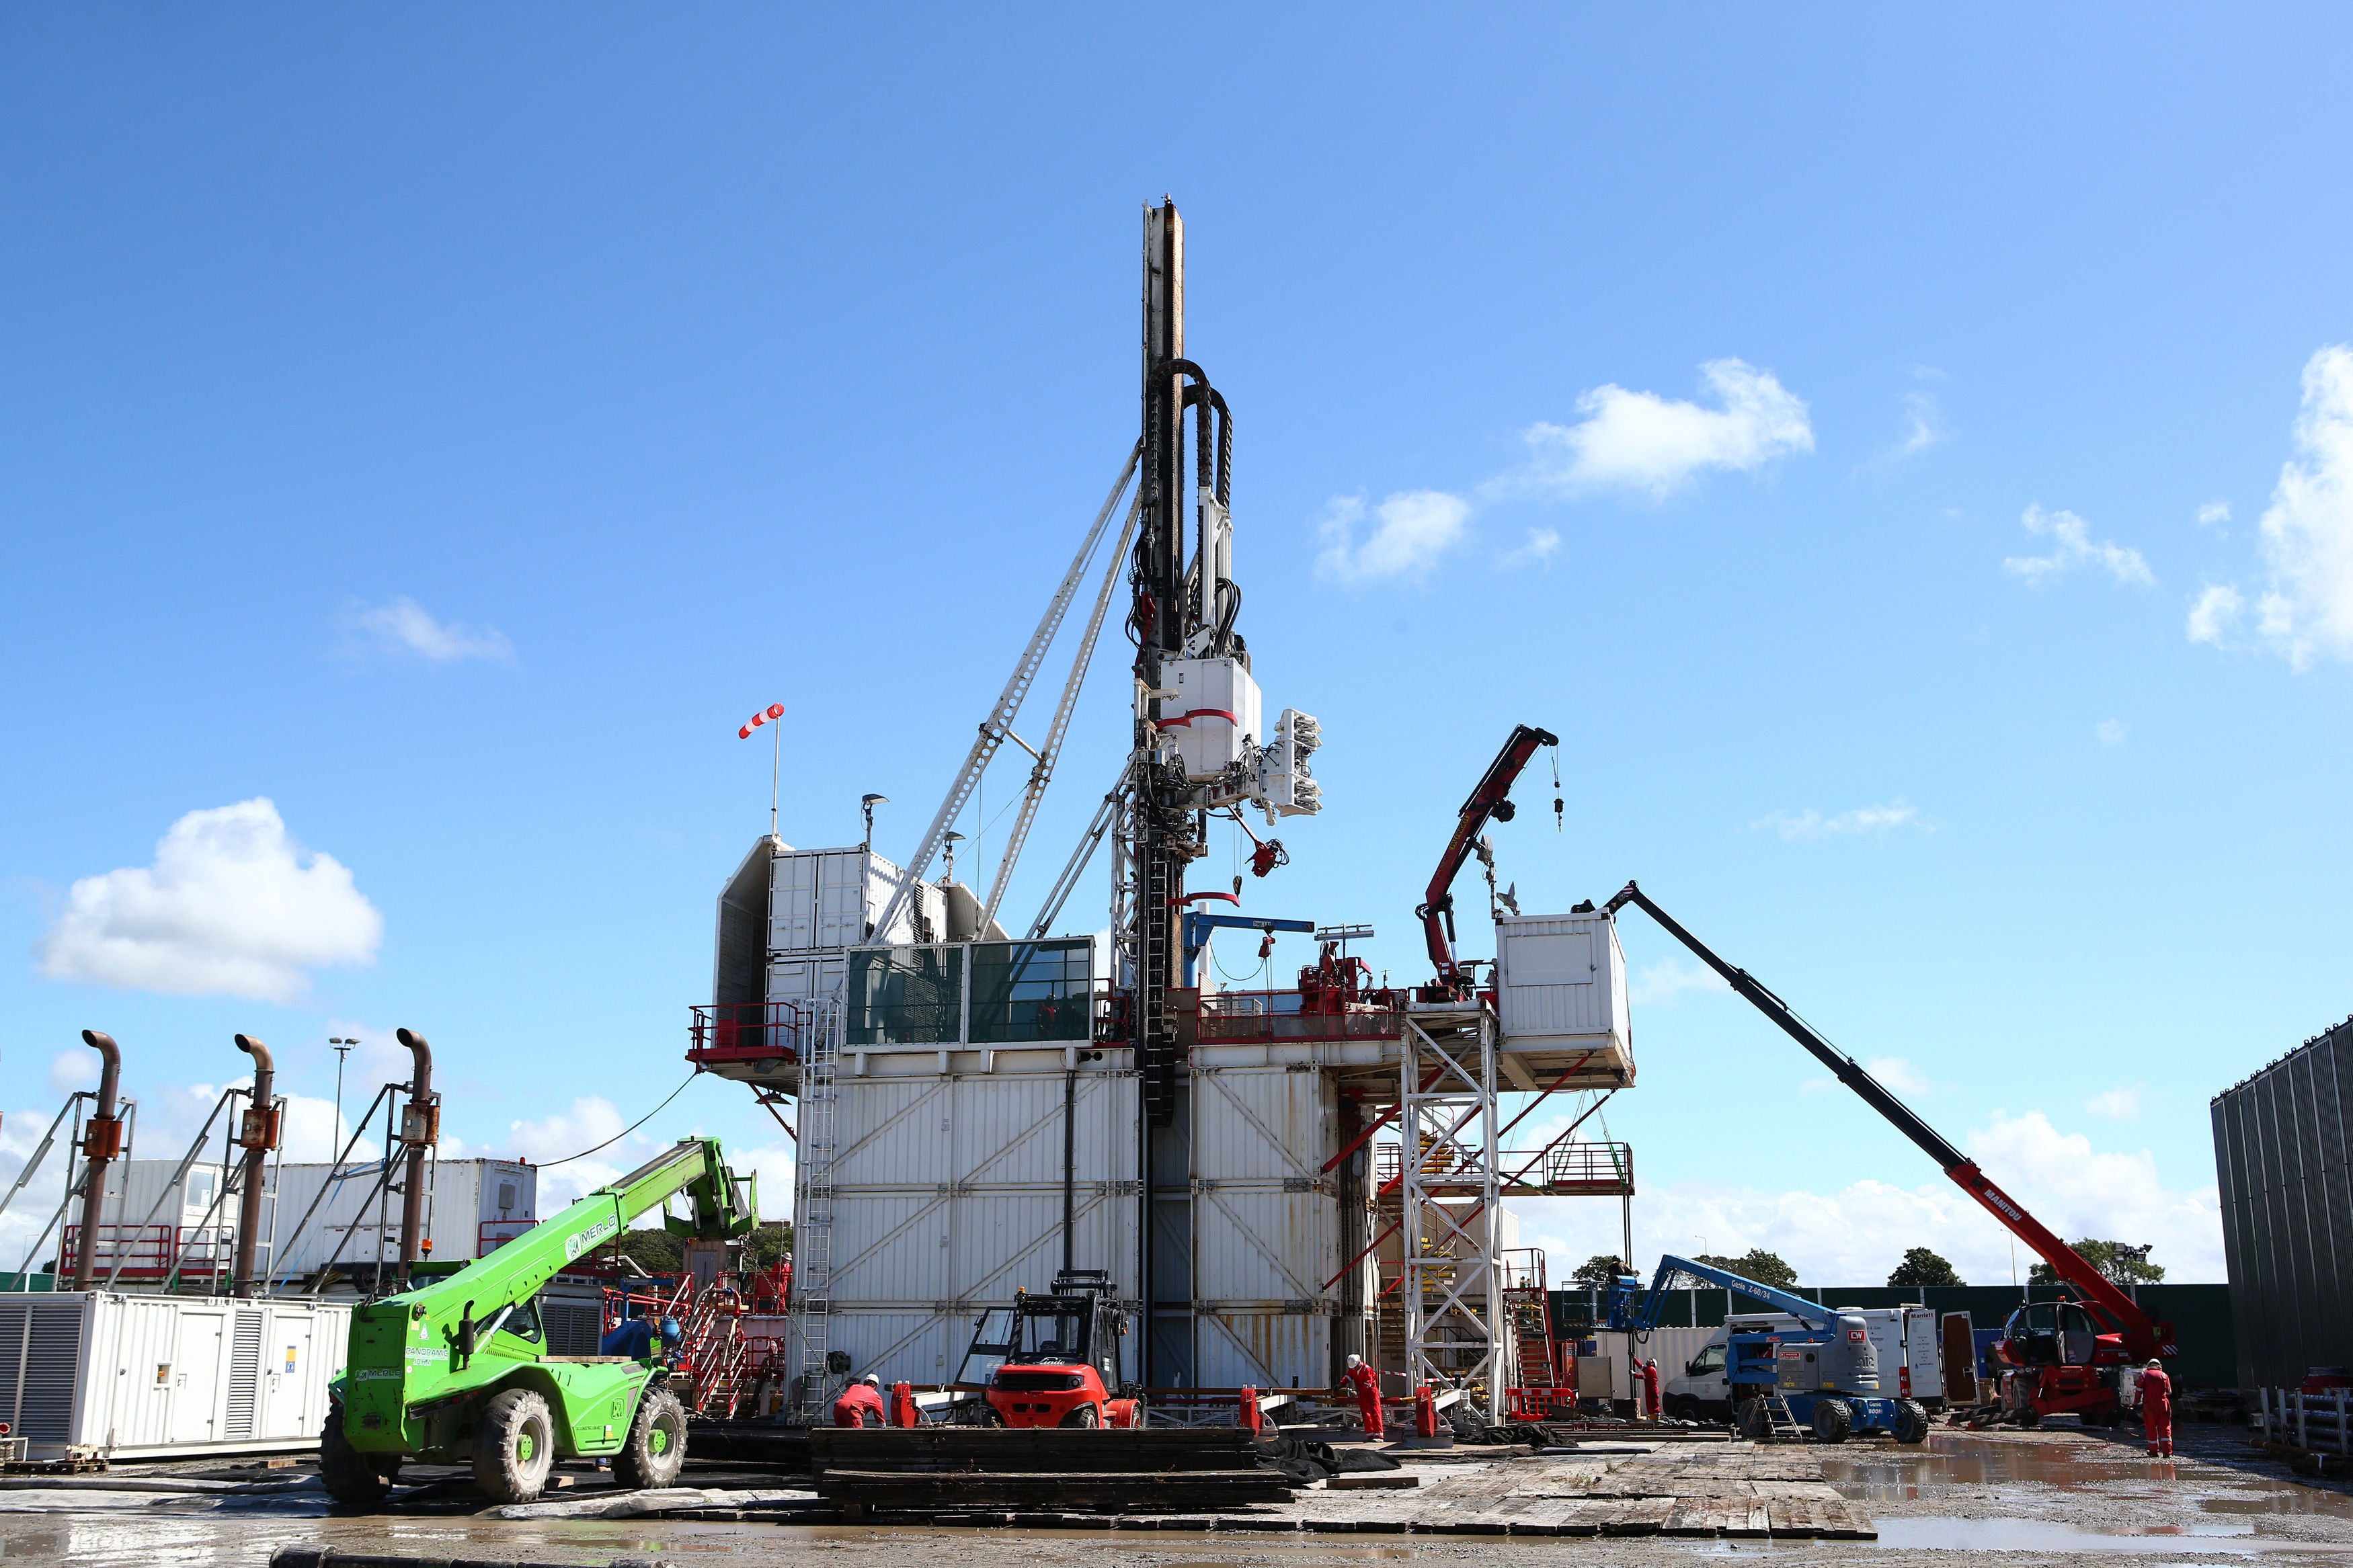 The drilling rig at Preston New Road shale gas exploration site (Dave Thompson)